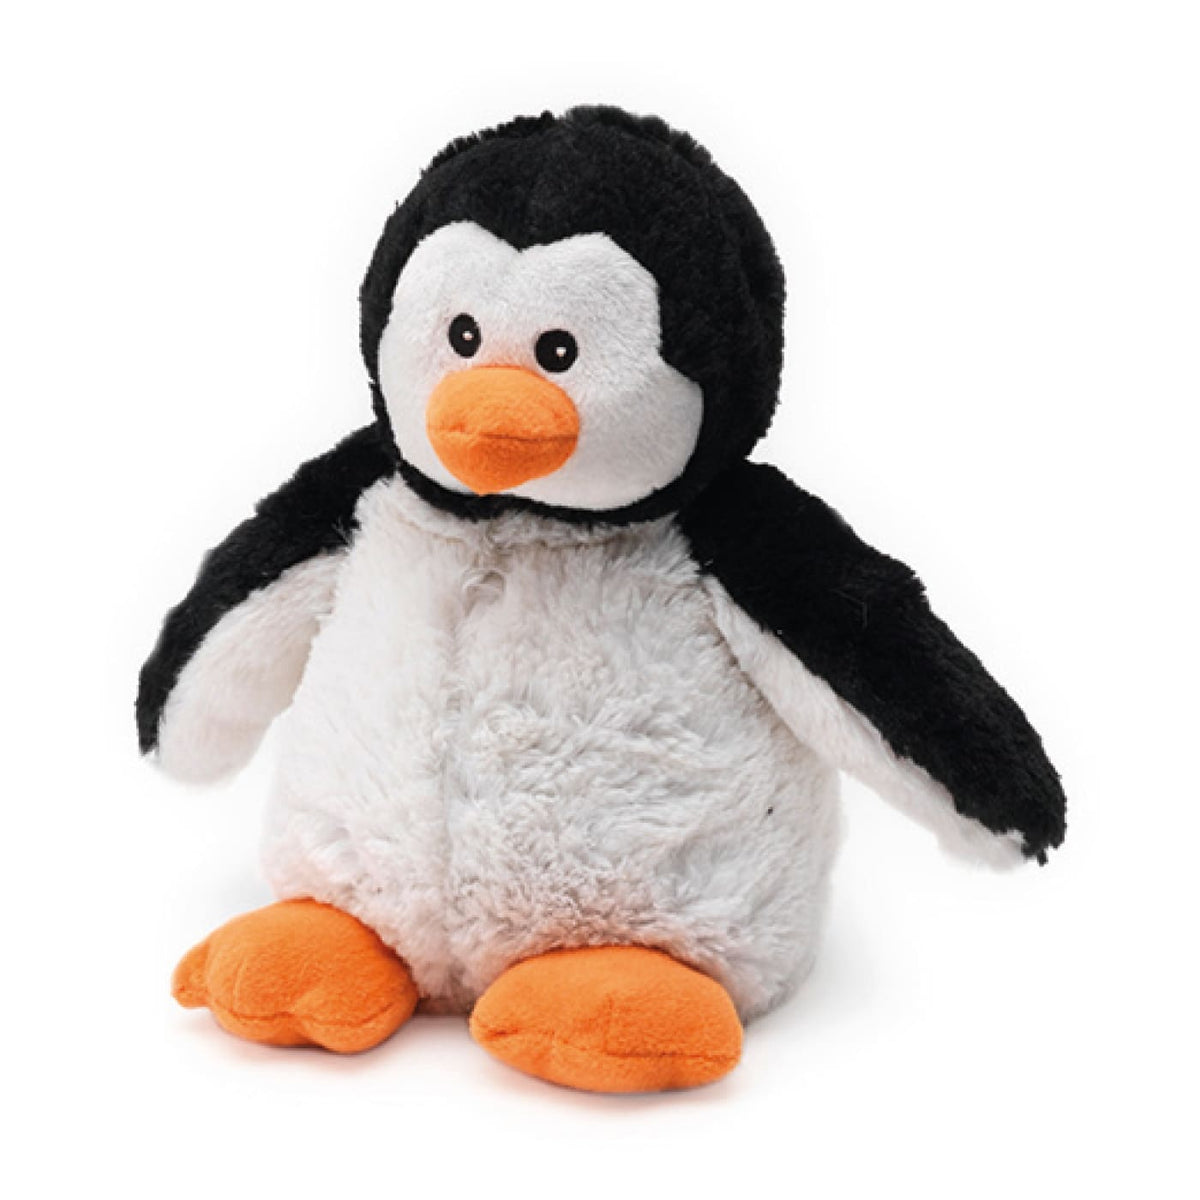 Warmies Cozy Plush - Penguin - Penguin - HEALTH &amp; HOME SAFETY - THERMOMETERS/MEDICINAL